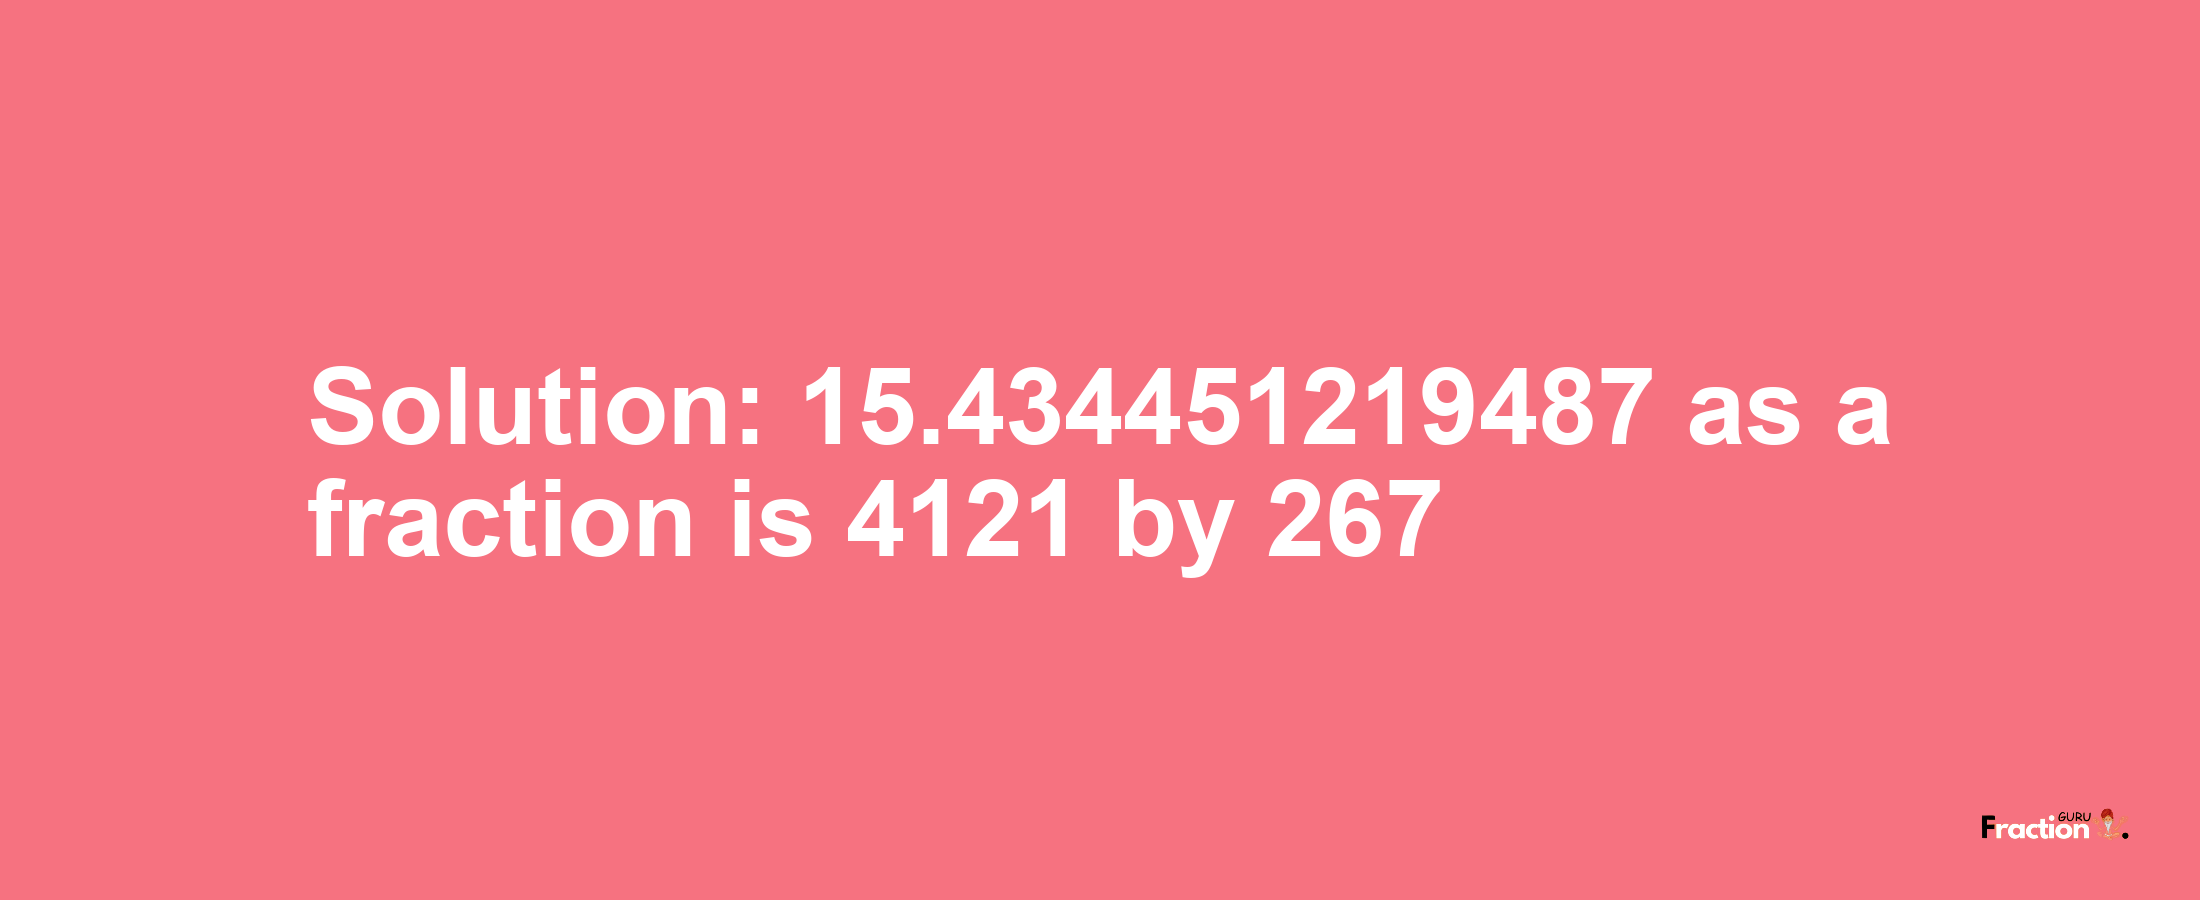 Solution:15.434451219487 as a fraction is 4121/267